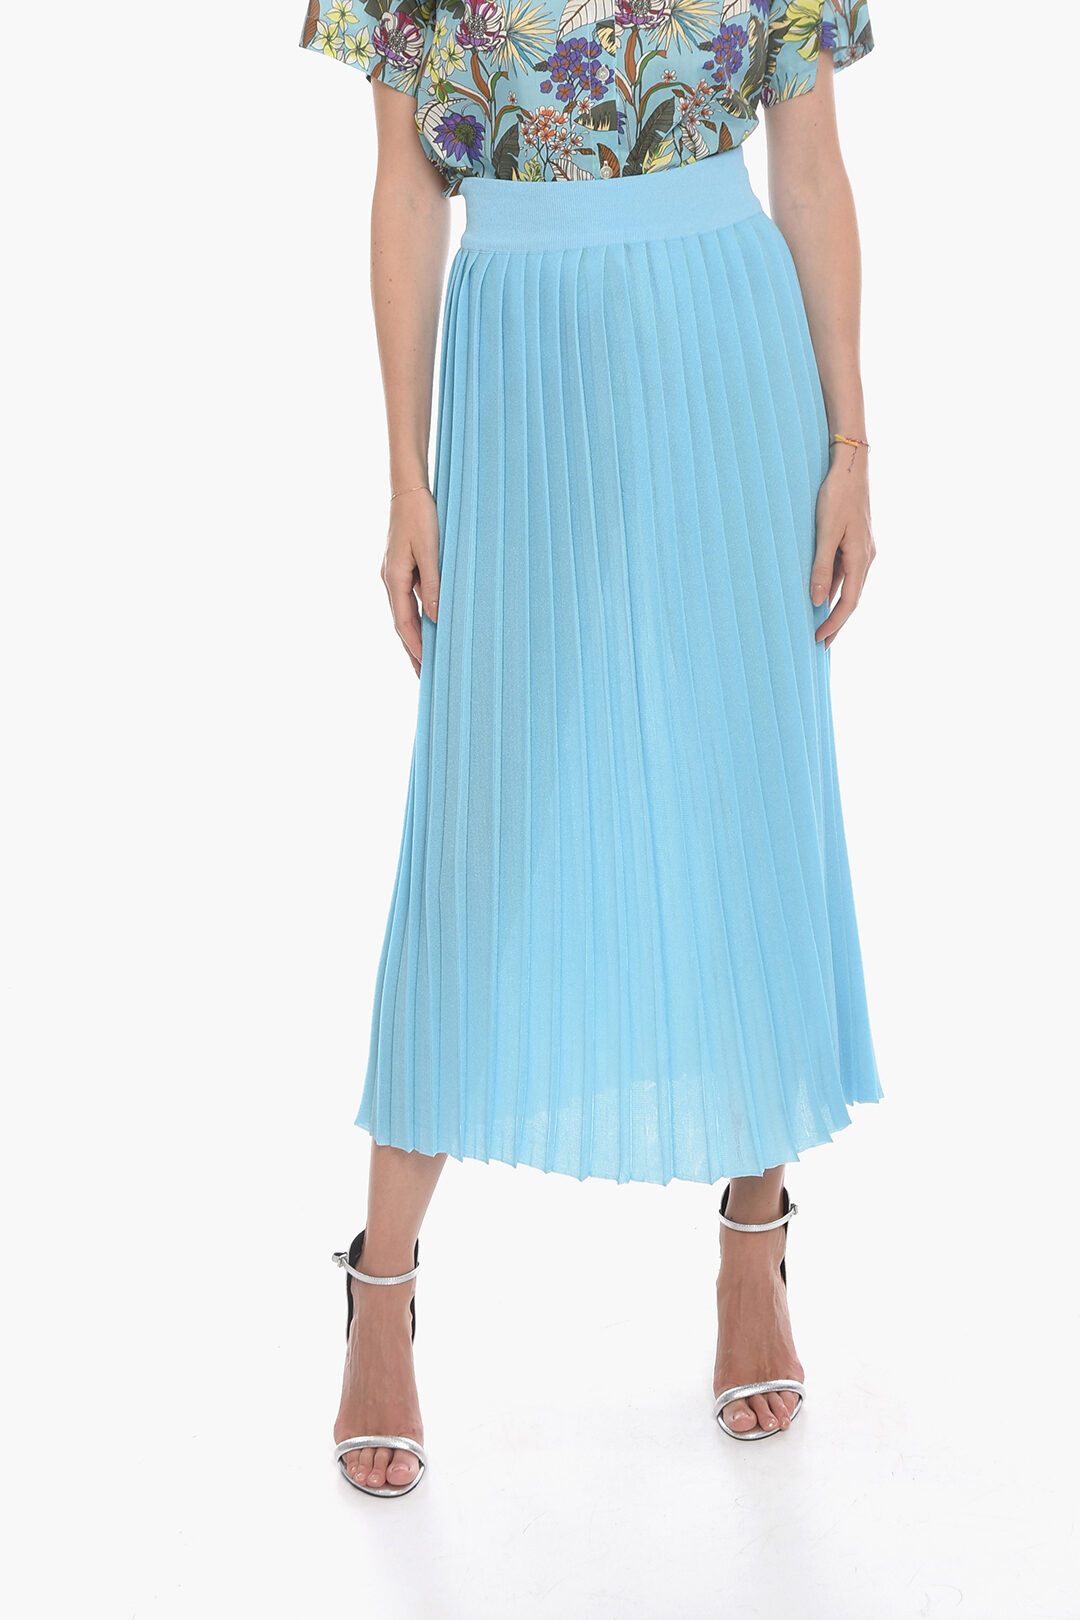 Altea Knitted Pleated Flared Skirt women - Glamood Outlet